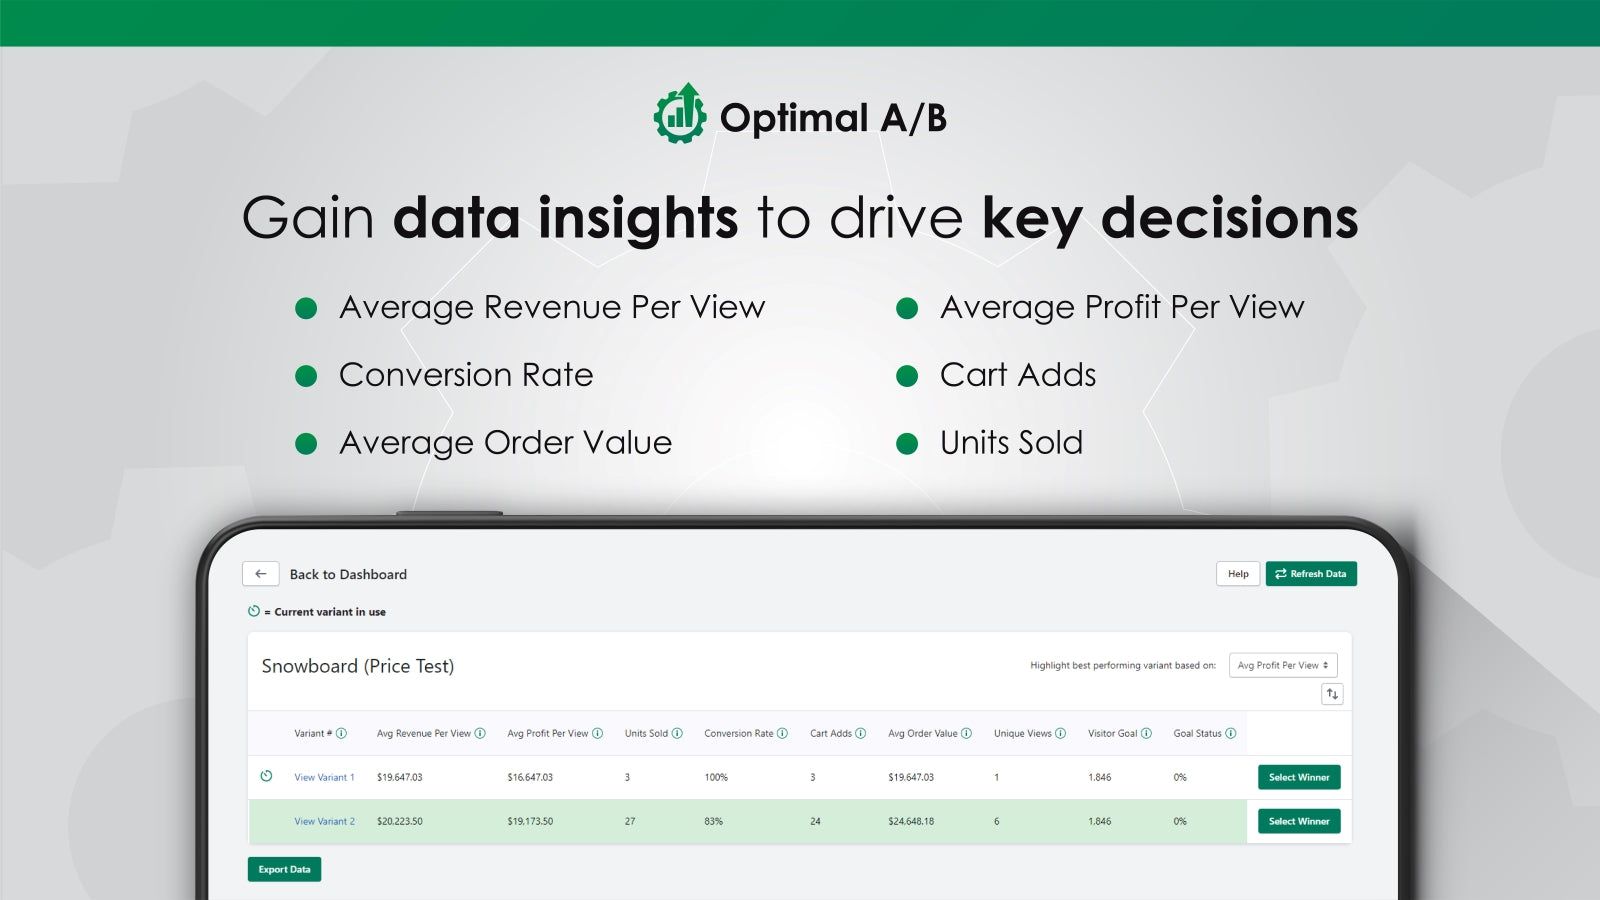 Drive key decisions with various data insights from Optimal A/B